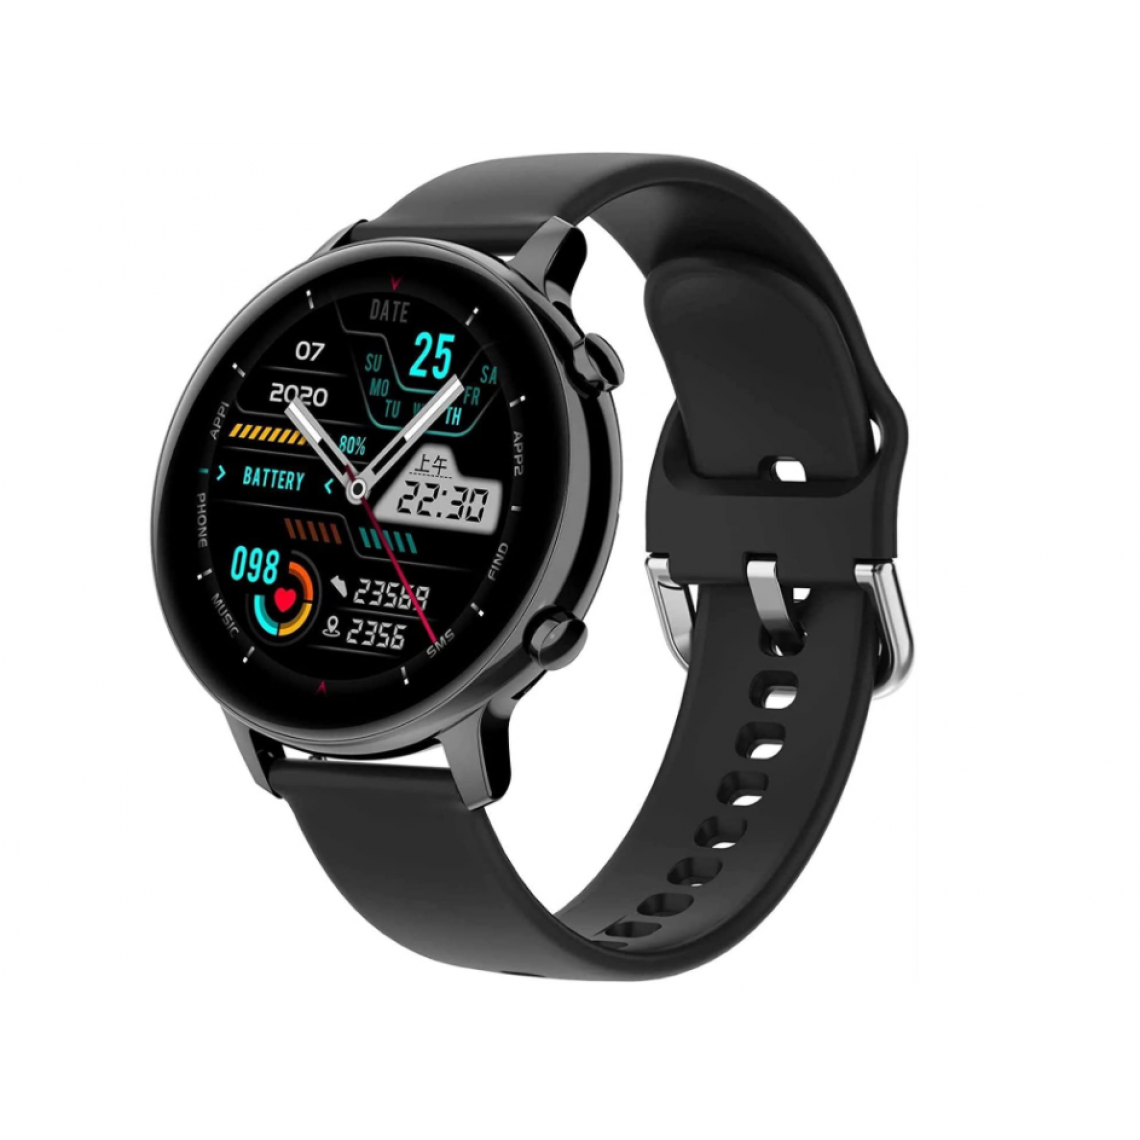 Chronotech Montres - Chronus Bluetooth Talking Smartwatch, Waterproof Activity Tracker with Full Touch Color Screen, Heart Rate Monitor, Fitness Pedometer (Black) - Montre connectée